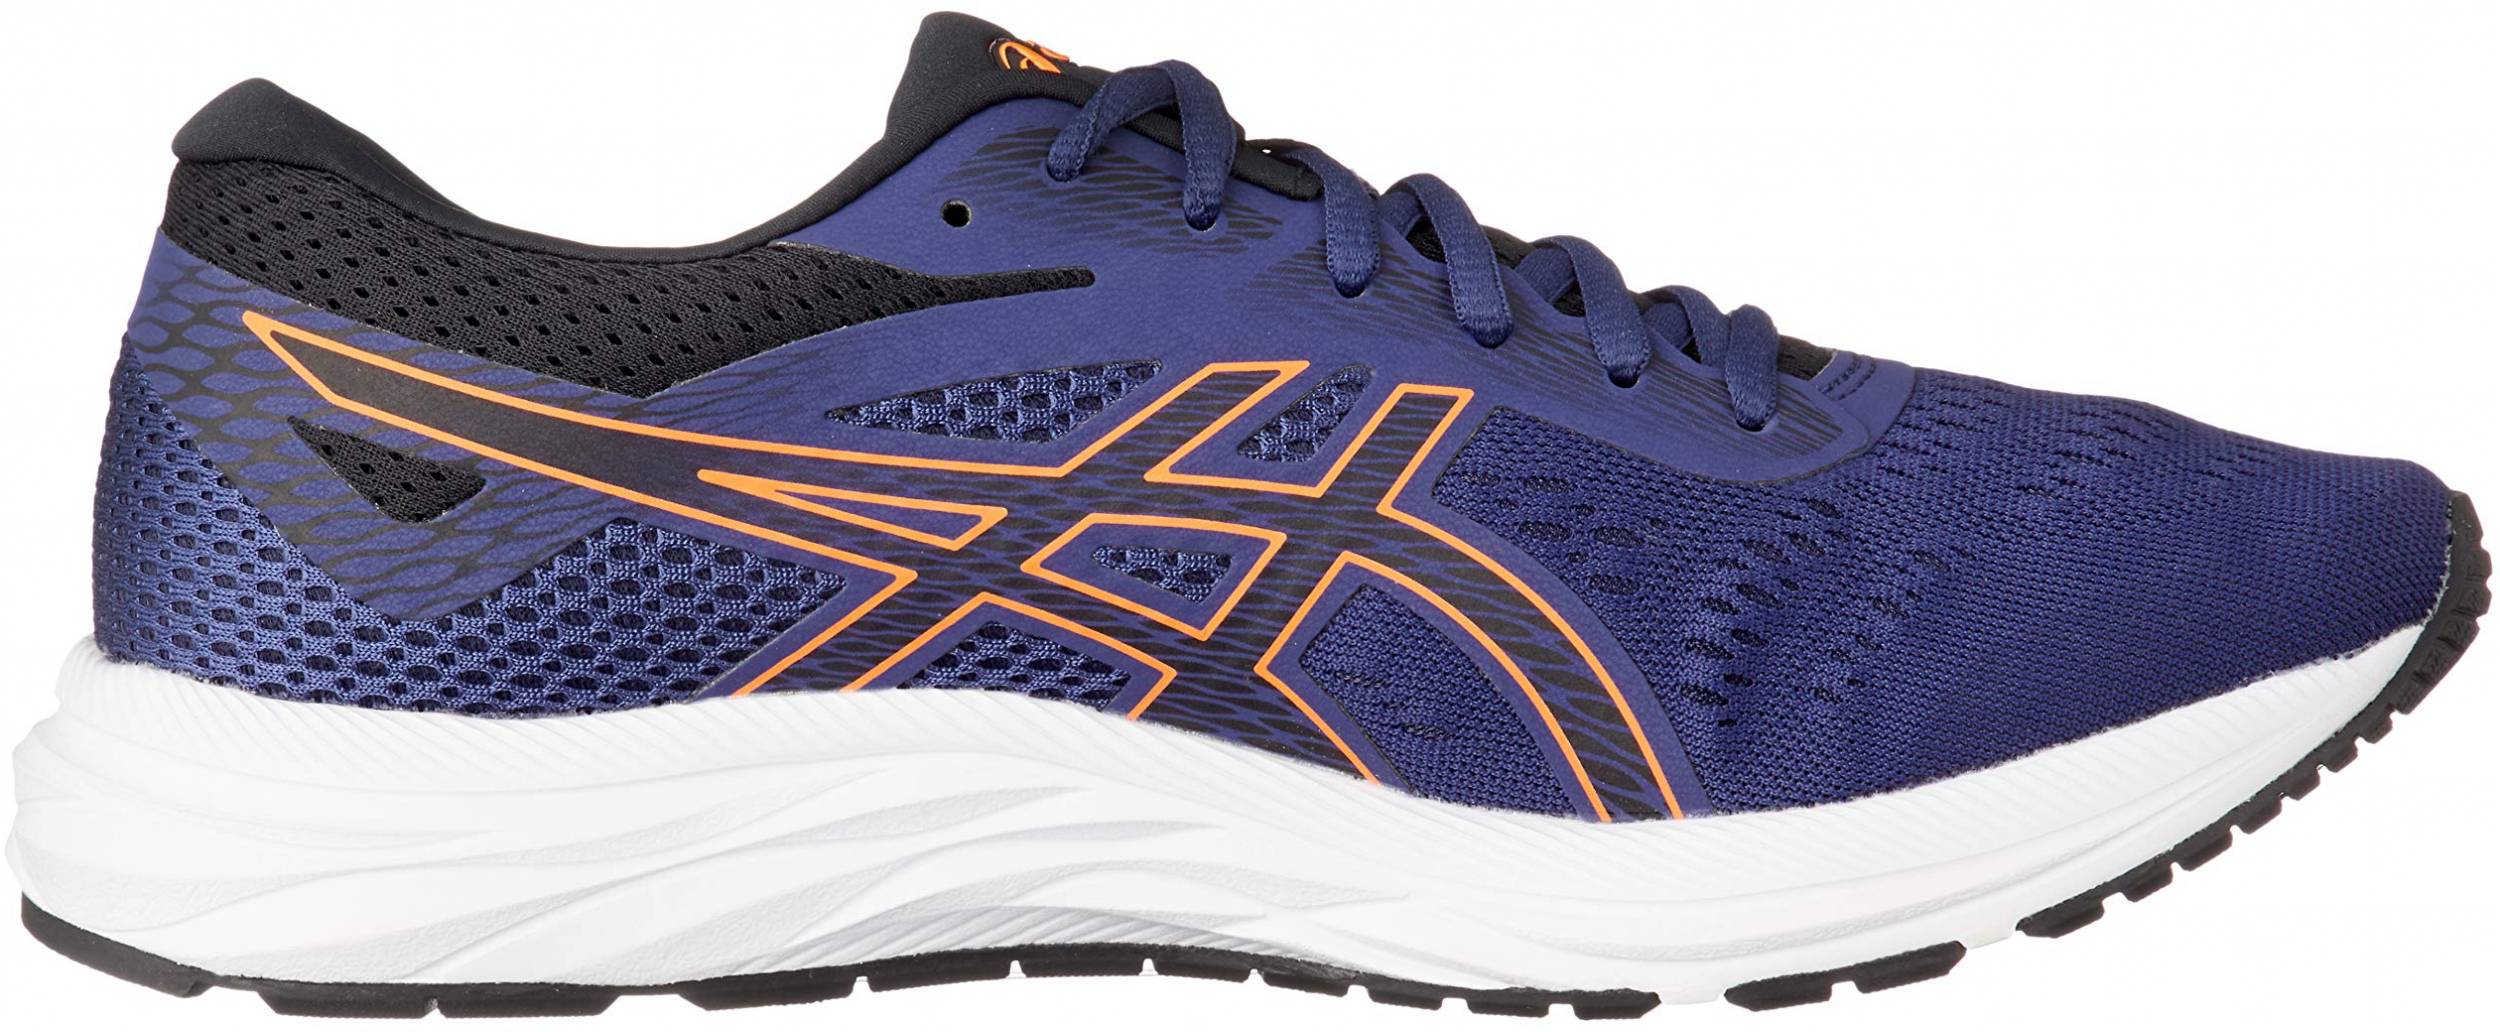 Asics Gel Excite 6 Review 2022, Facts 